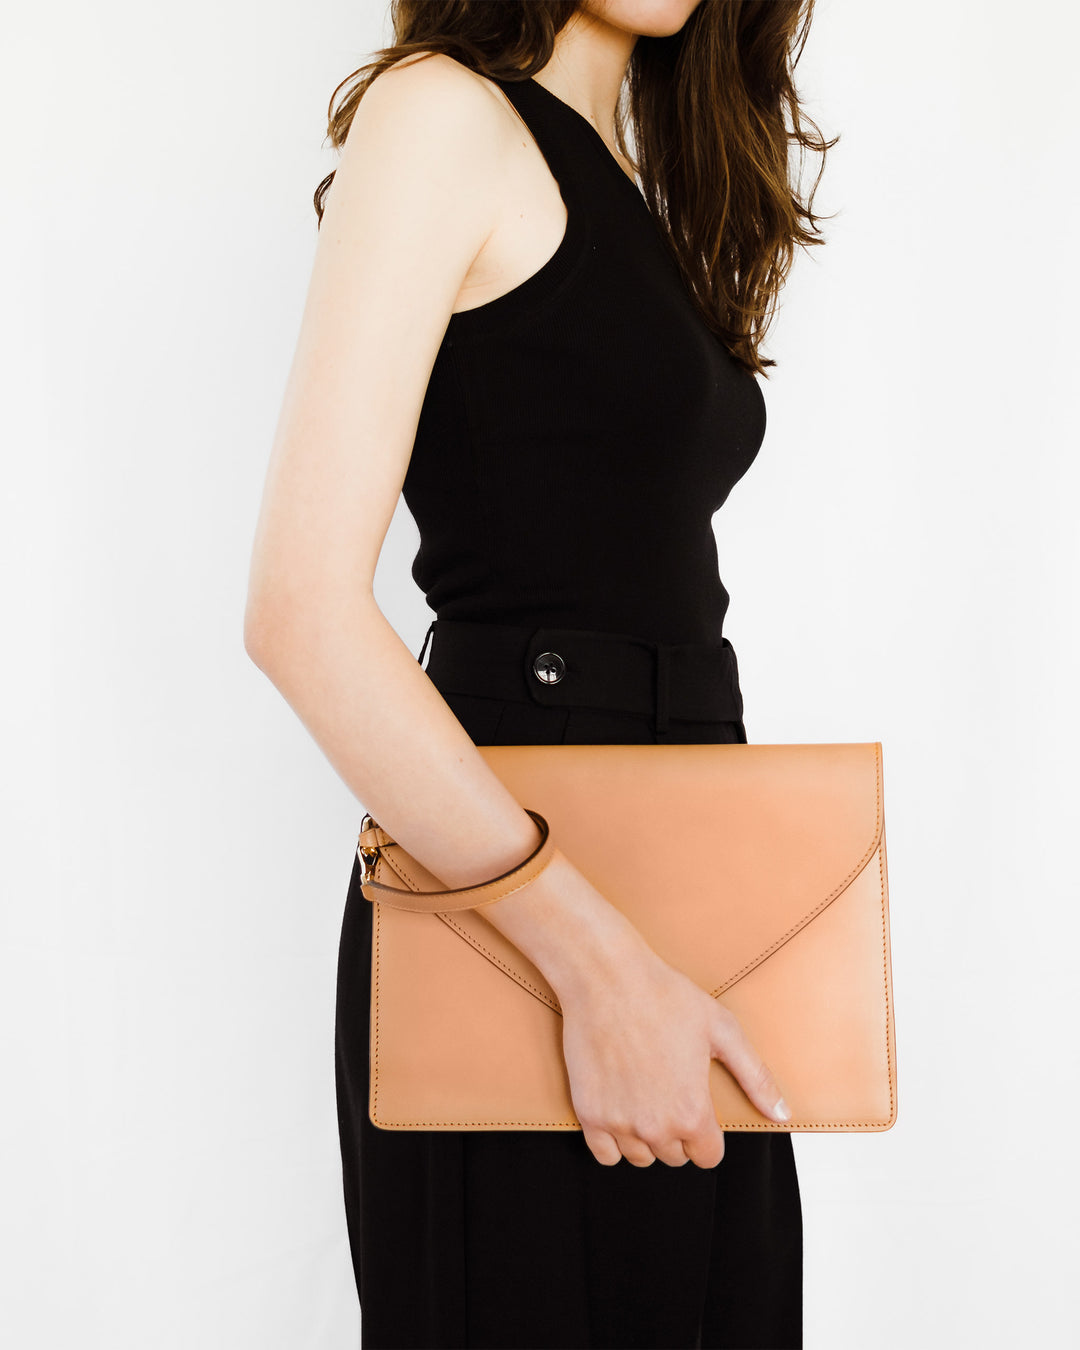 MODHER Envelope Clutch in Naturale vegetable tanned leather#color_naturale